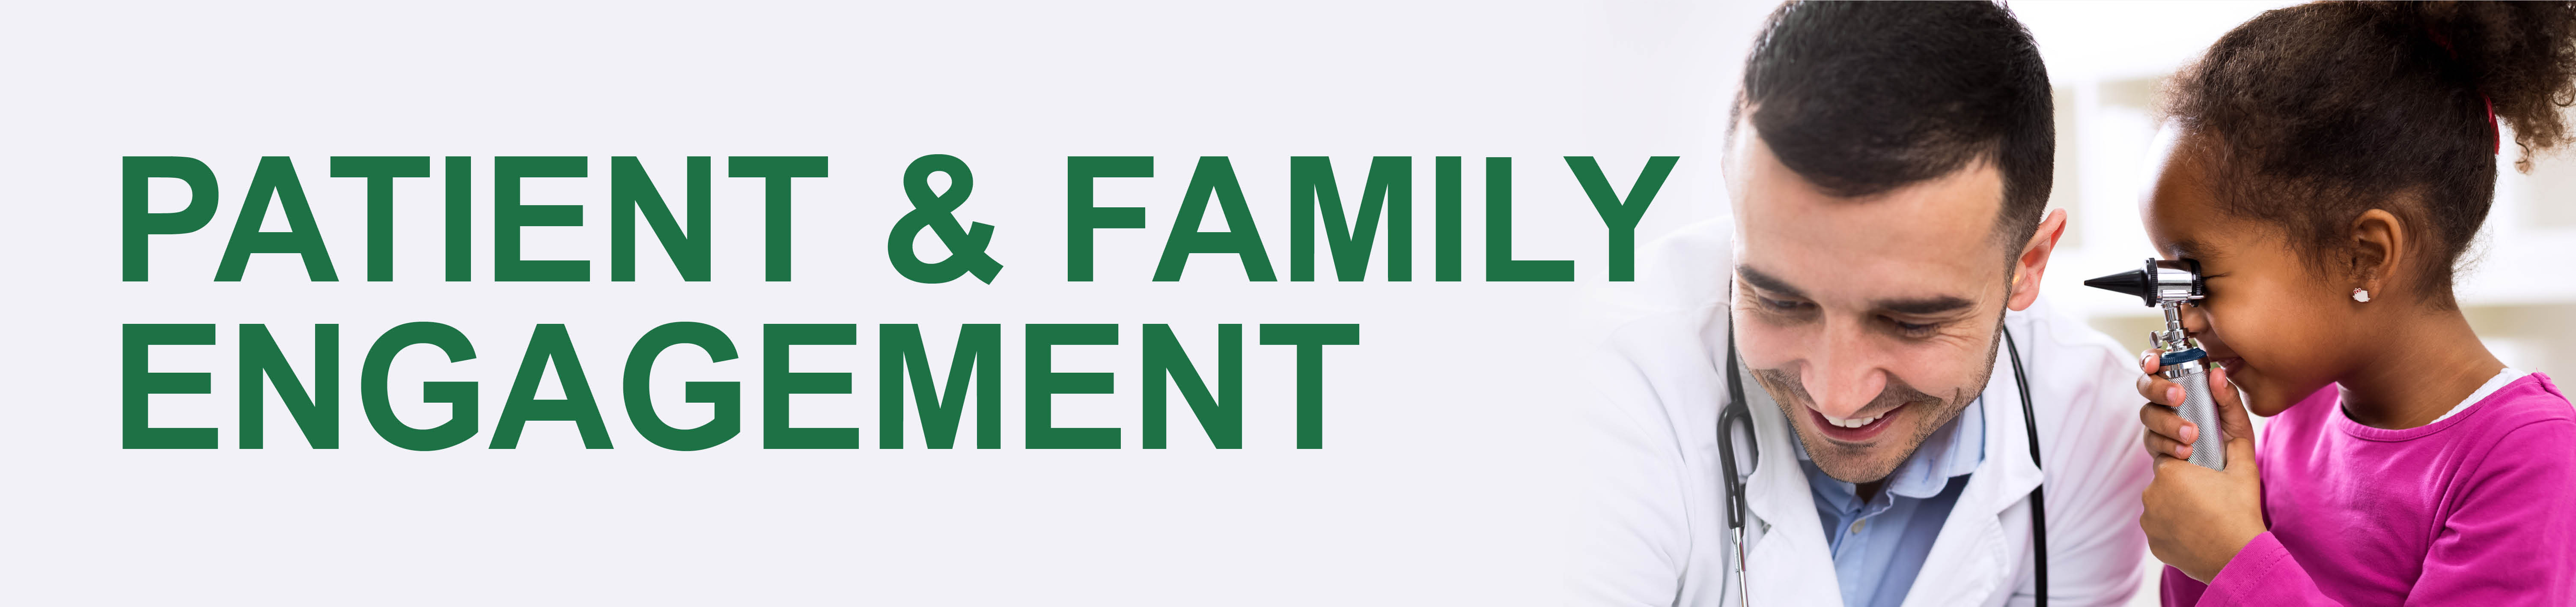 Patient and Family Engagement Banner